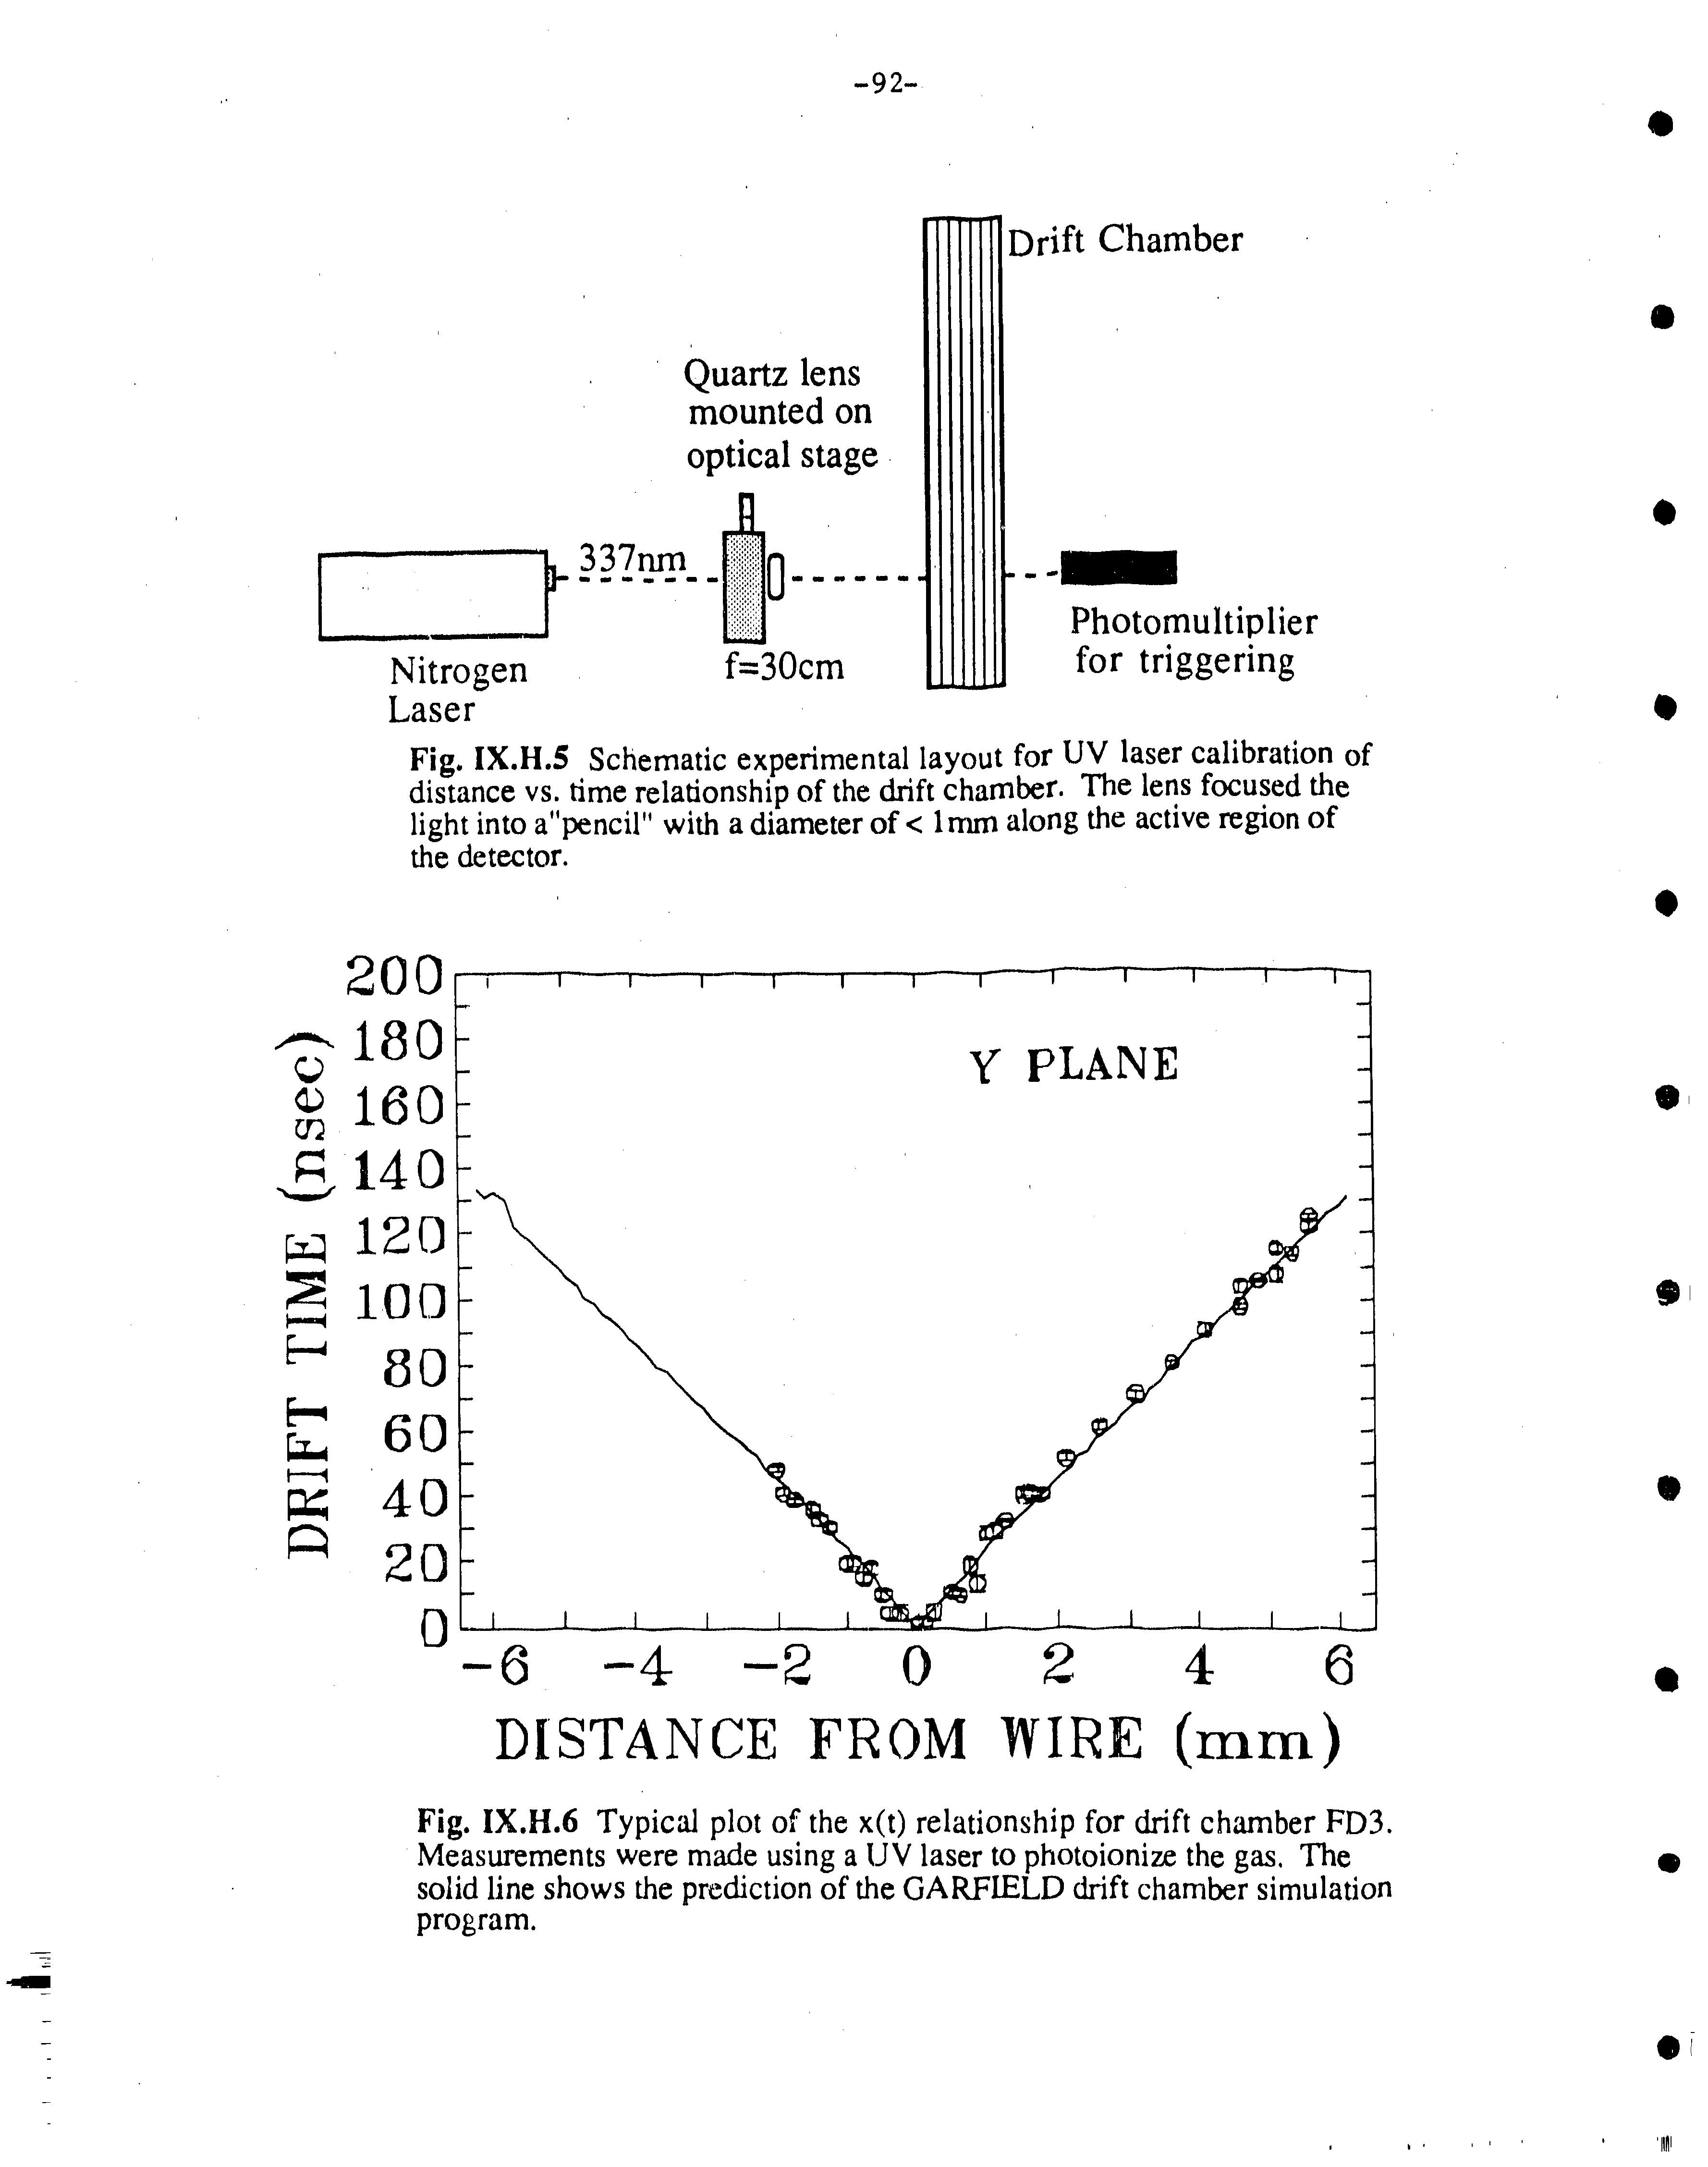 Fig. IX.H.5 Schematic experimental layout for UV laser calibration of distance vs. time relationship of the drift chamber. The lens focused the light into a"pencil" with a diameter of < 1mm along the active region of the detector.